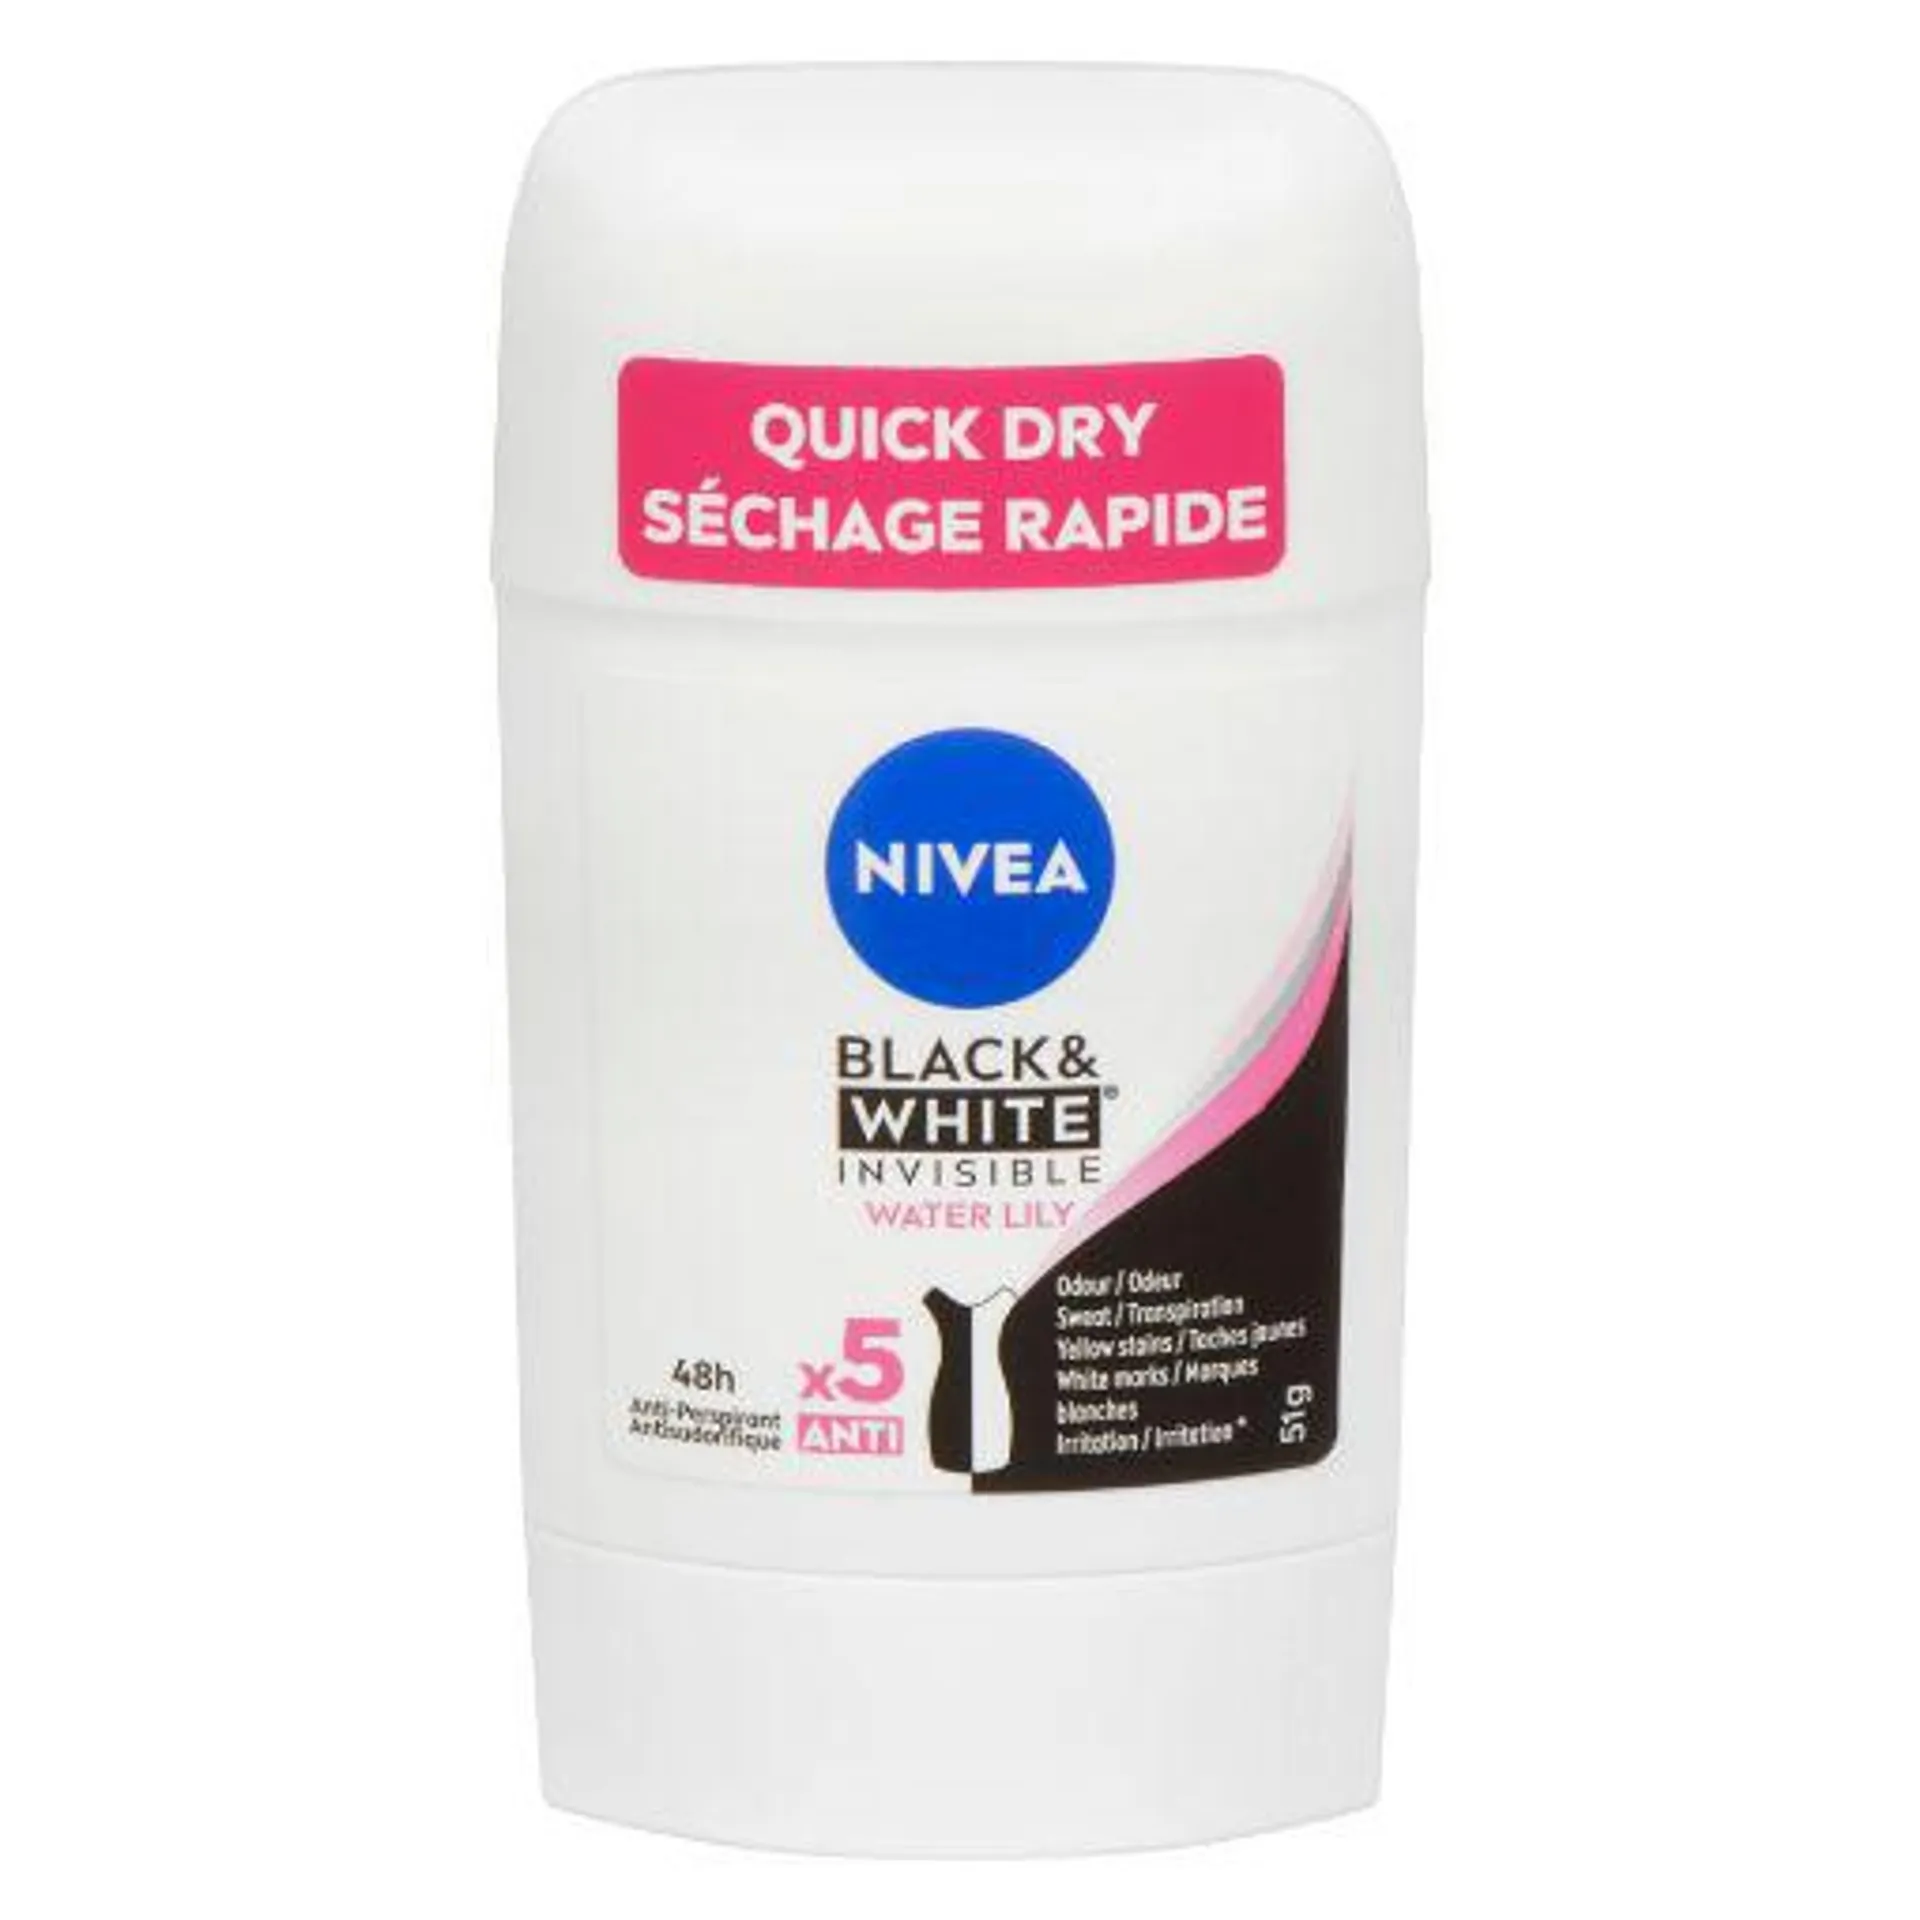 NIVEA BLACK and WHITE ANTIPERSPIRANT STICK - WATER LILY 51GR